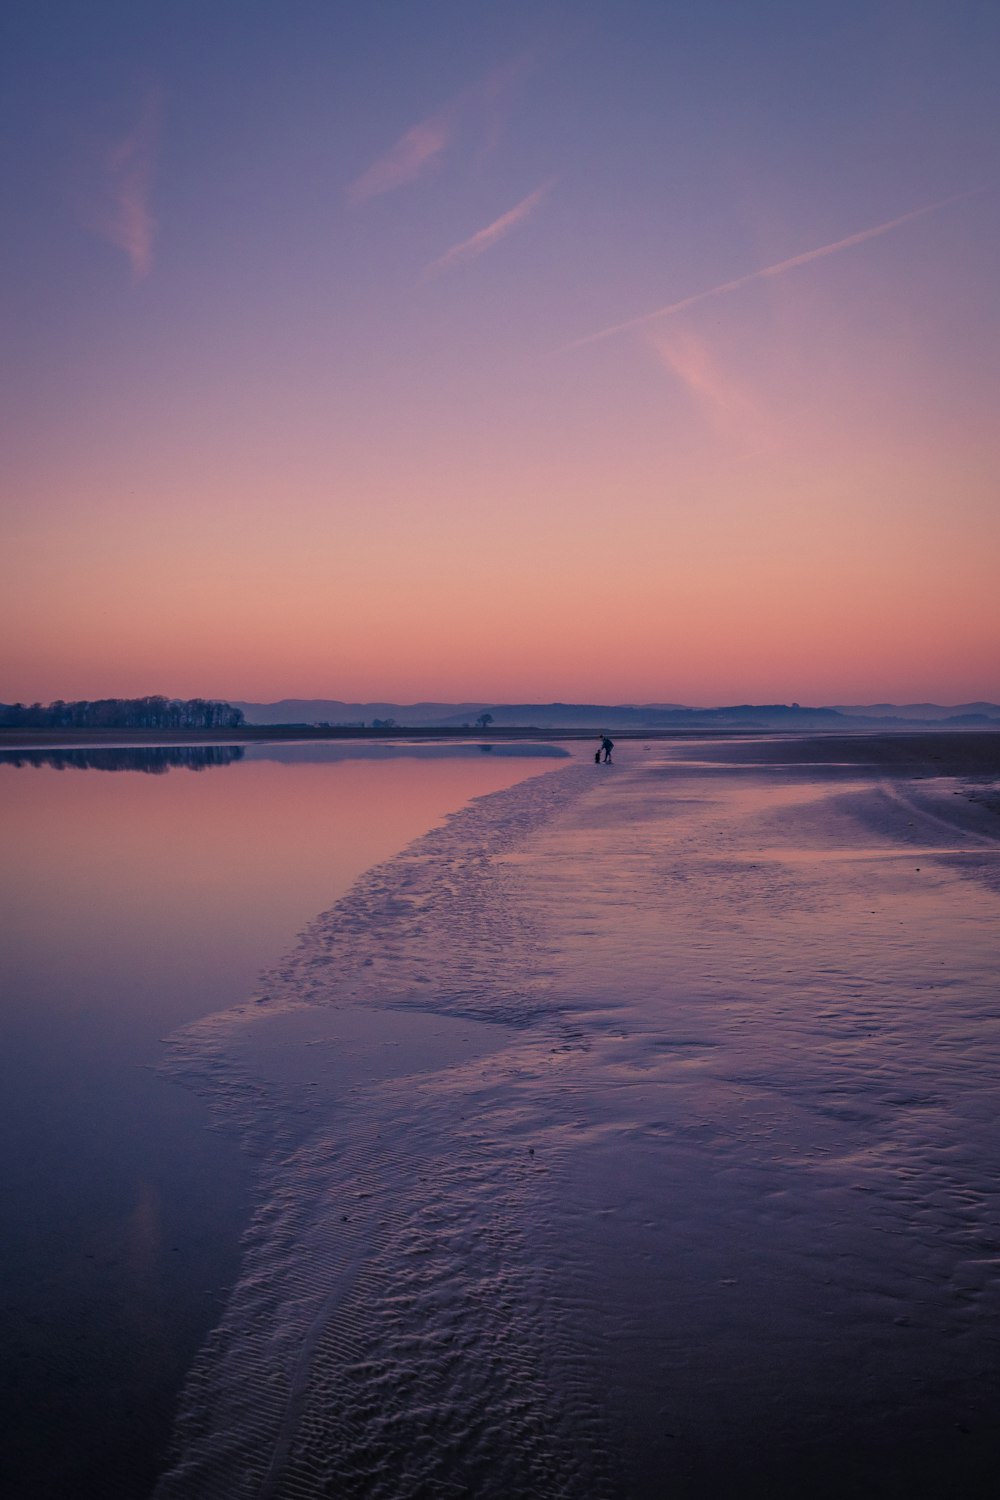 a person walking on a beach at sunset